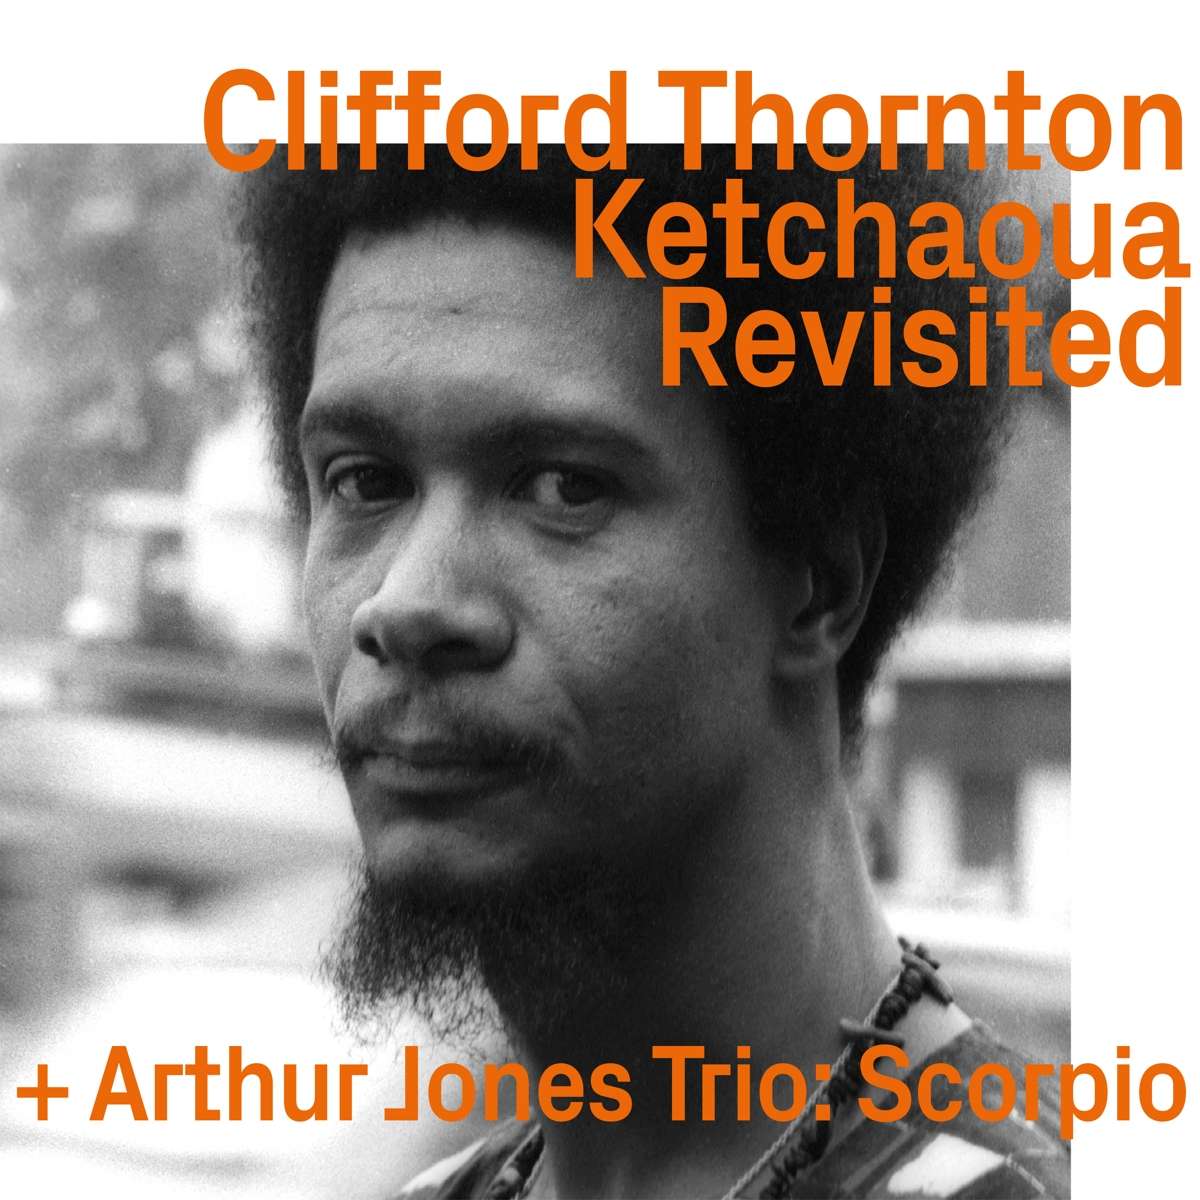 Clifford Thornton, Ketchaoua To Scorpio By Arthur Jones Revisited